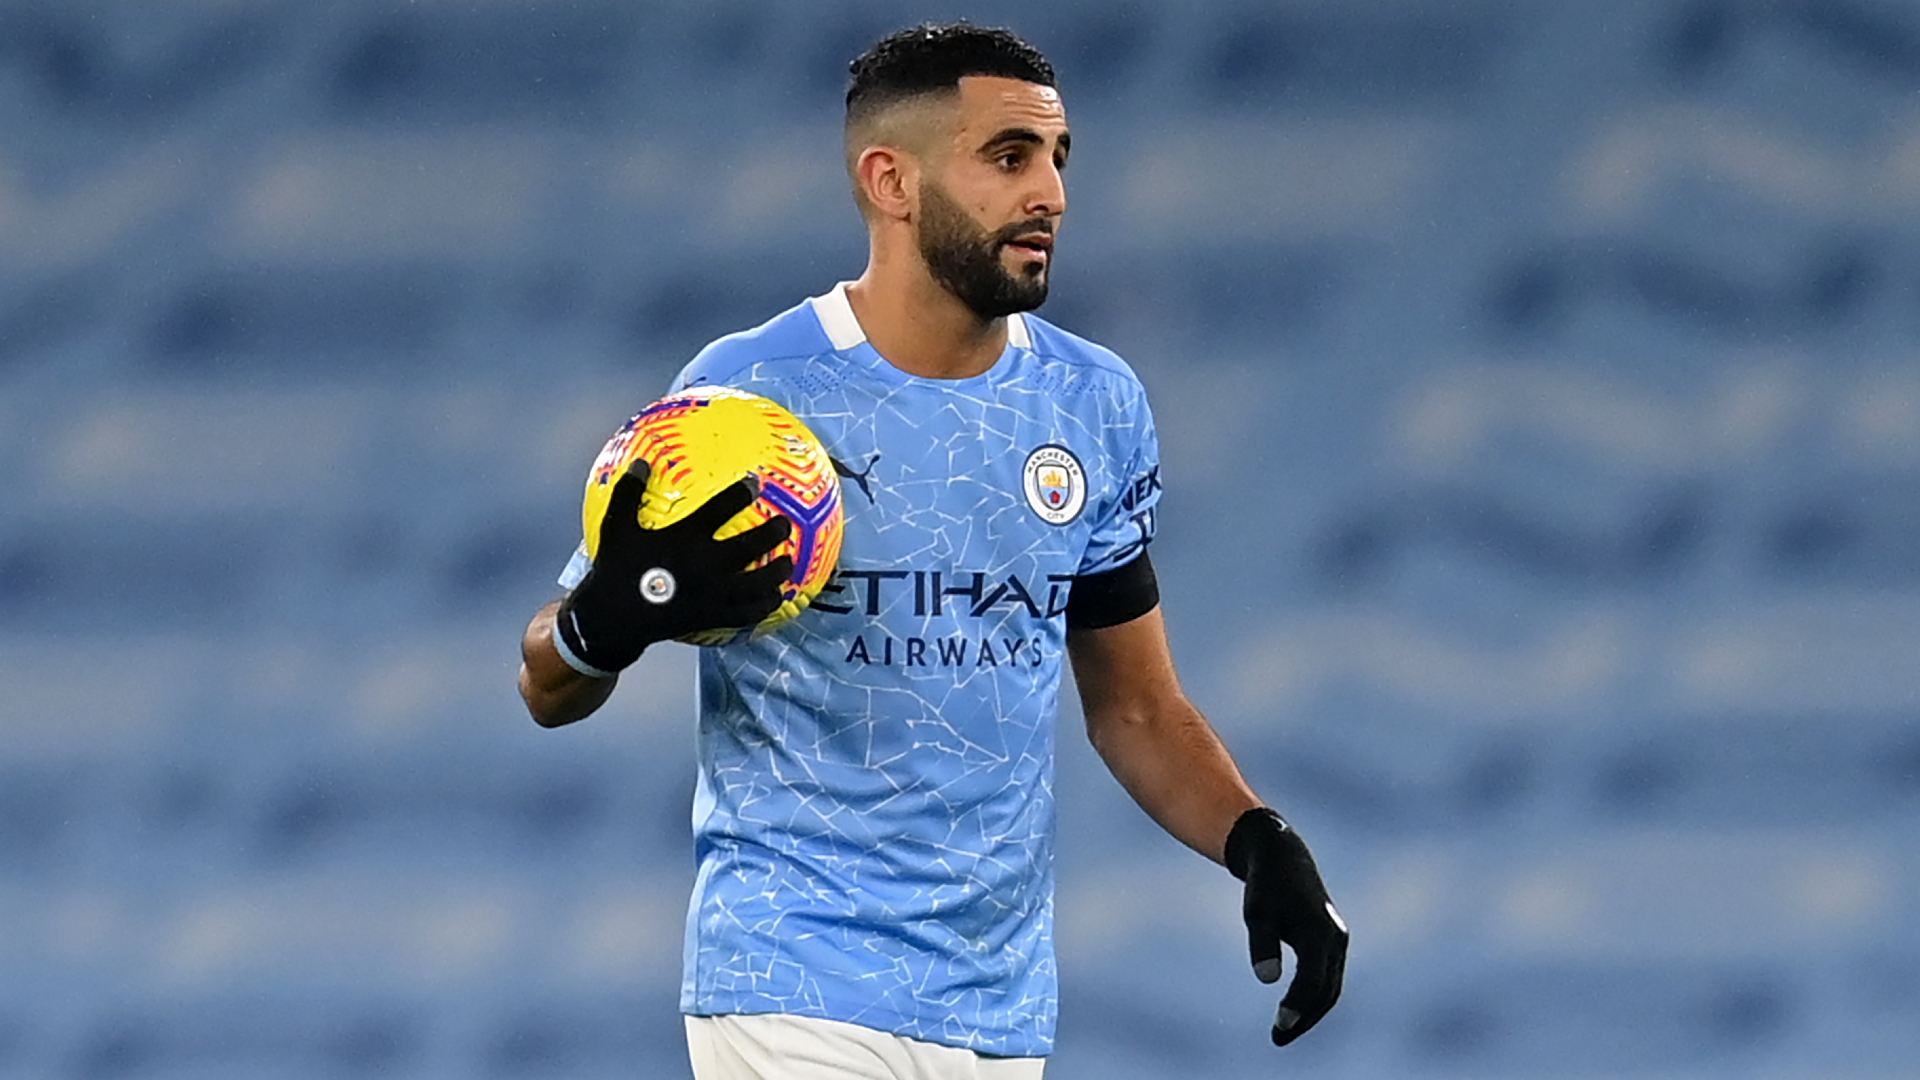 Hat-trick hero Mahrez helps shake Man City goal ‘frustration’ in five-star showing against Burnley